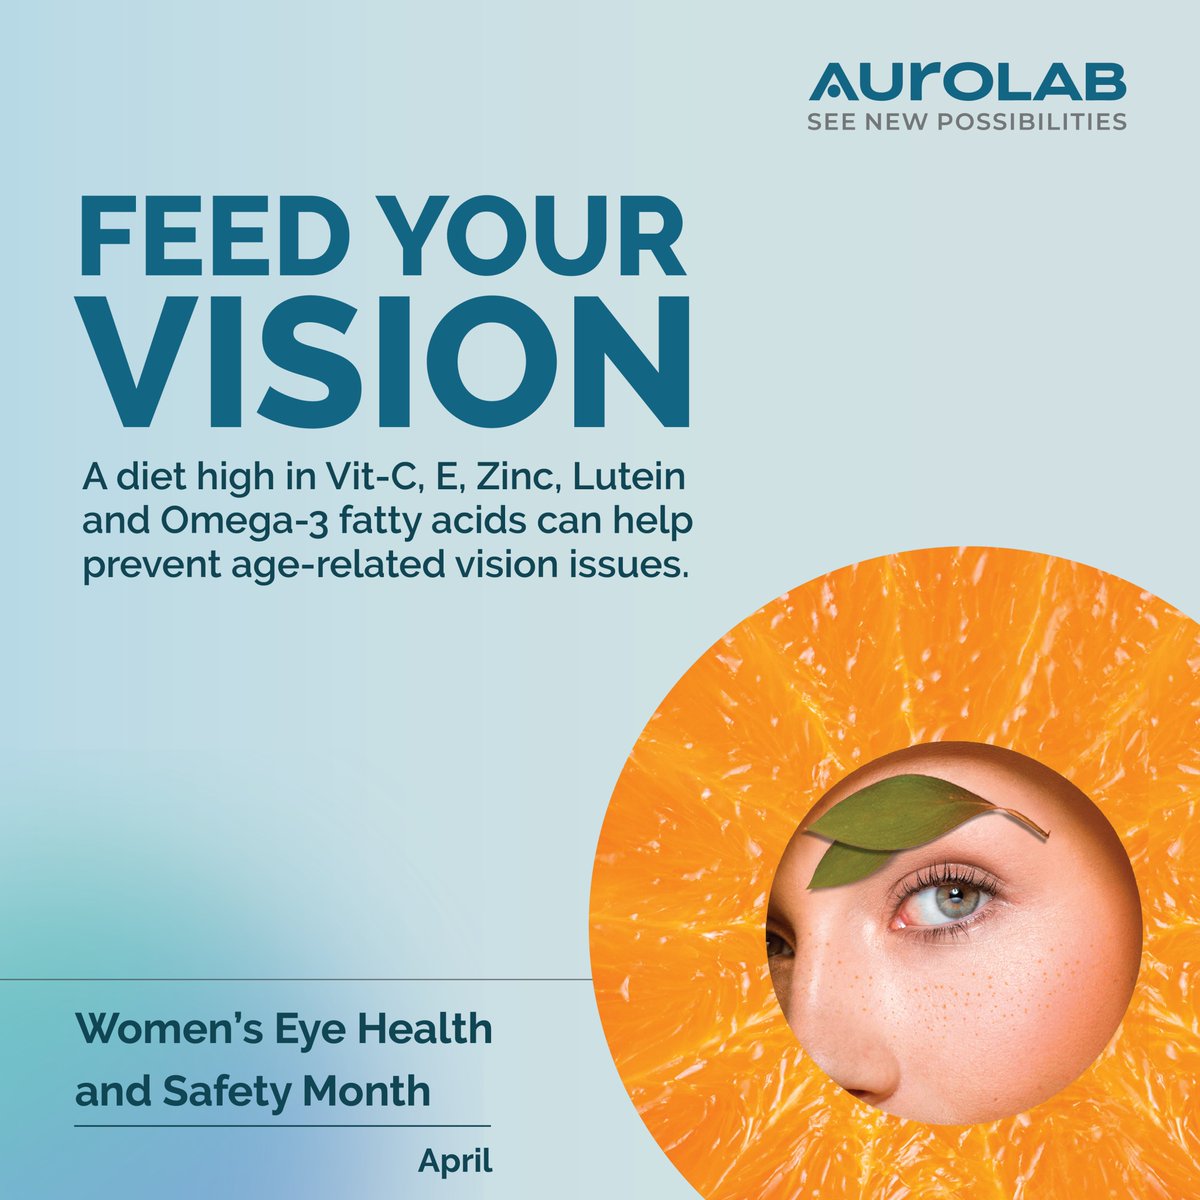 Feed Your Vision! This Women's Eye Health and Safety Month, let's focus on nutrition for our eyes. Add colorful fruits and veggies to your plate and keep your eyes healthy and bright! 

#Aurolab #SeeNewPossibilities #WeAreAurolab #EyeNutrition #HealthyLiving #WomensEyeHealth